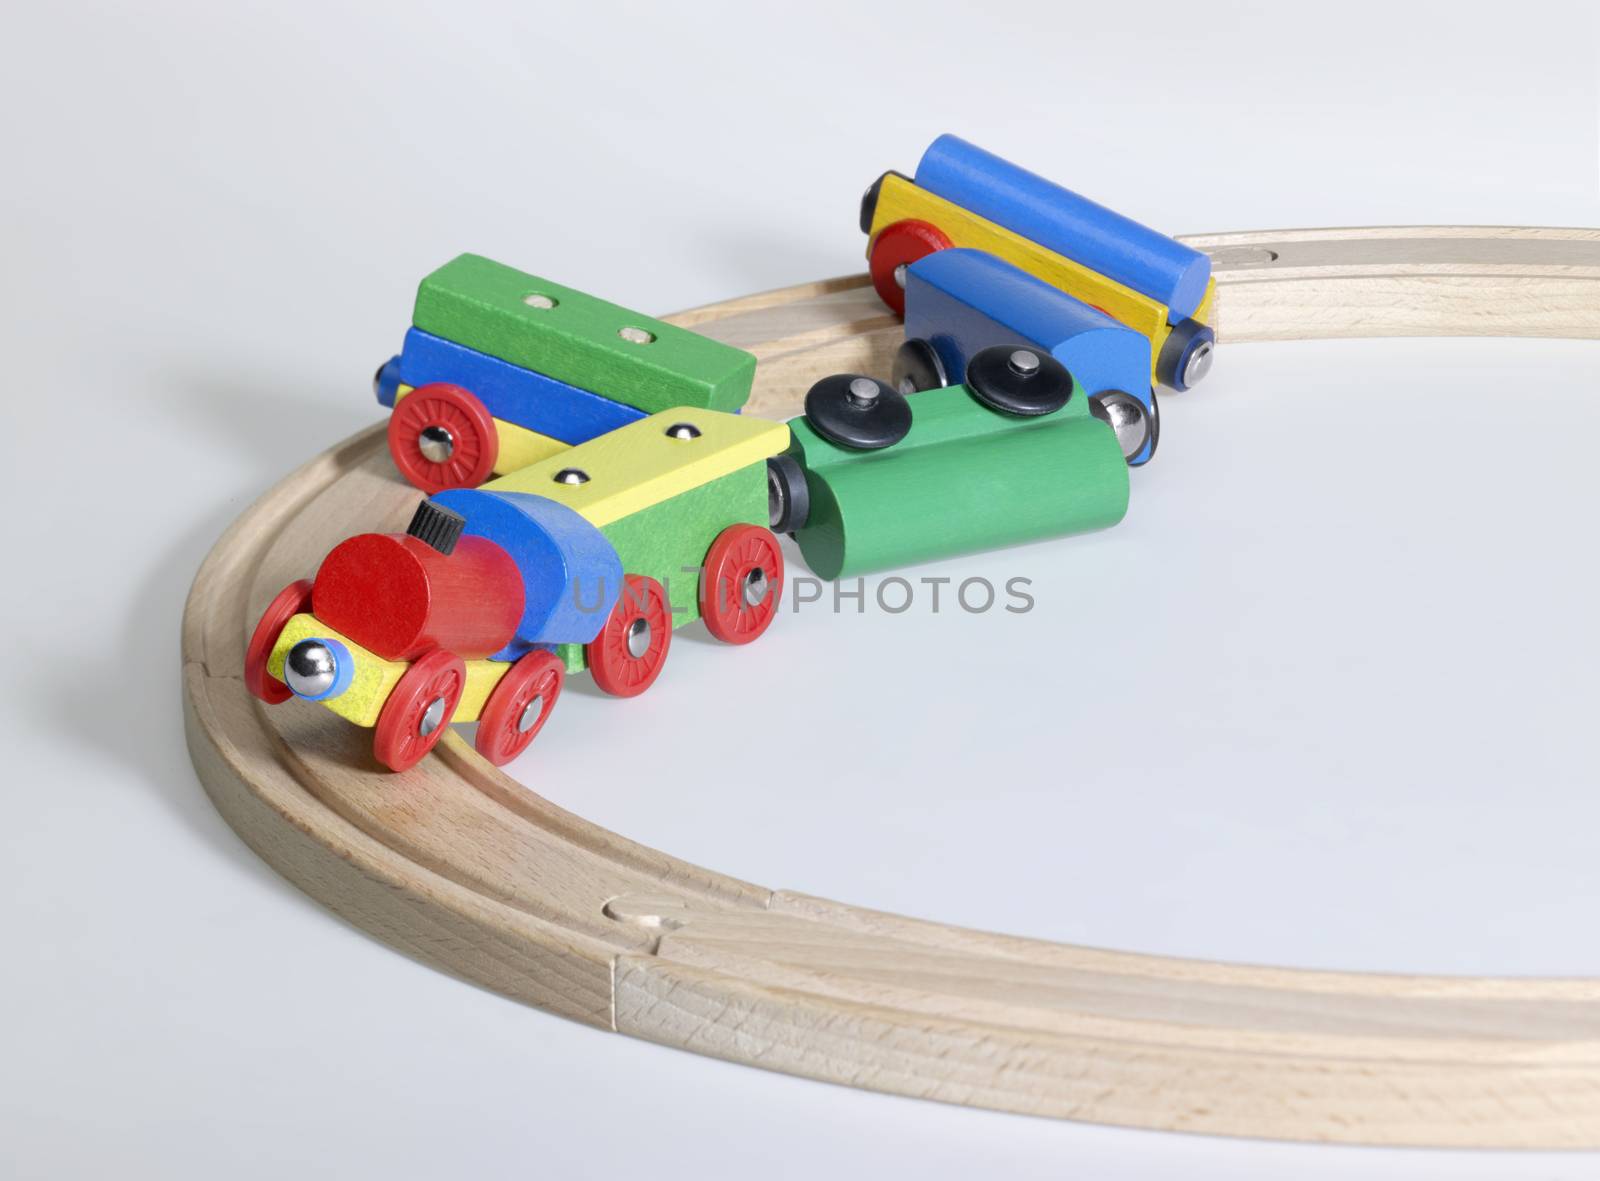 studio photography of a colorful wooden toy train and tracks while a accident happened, in light back